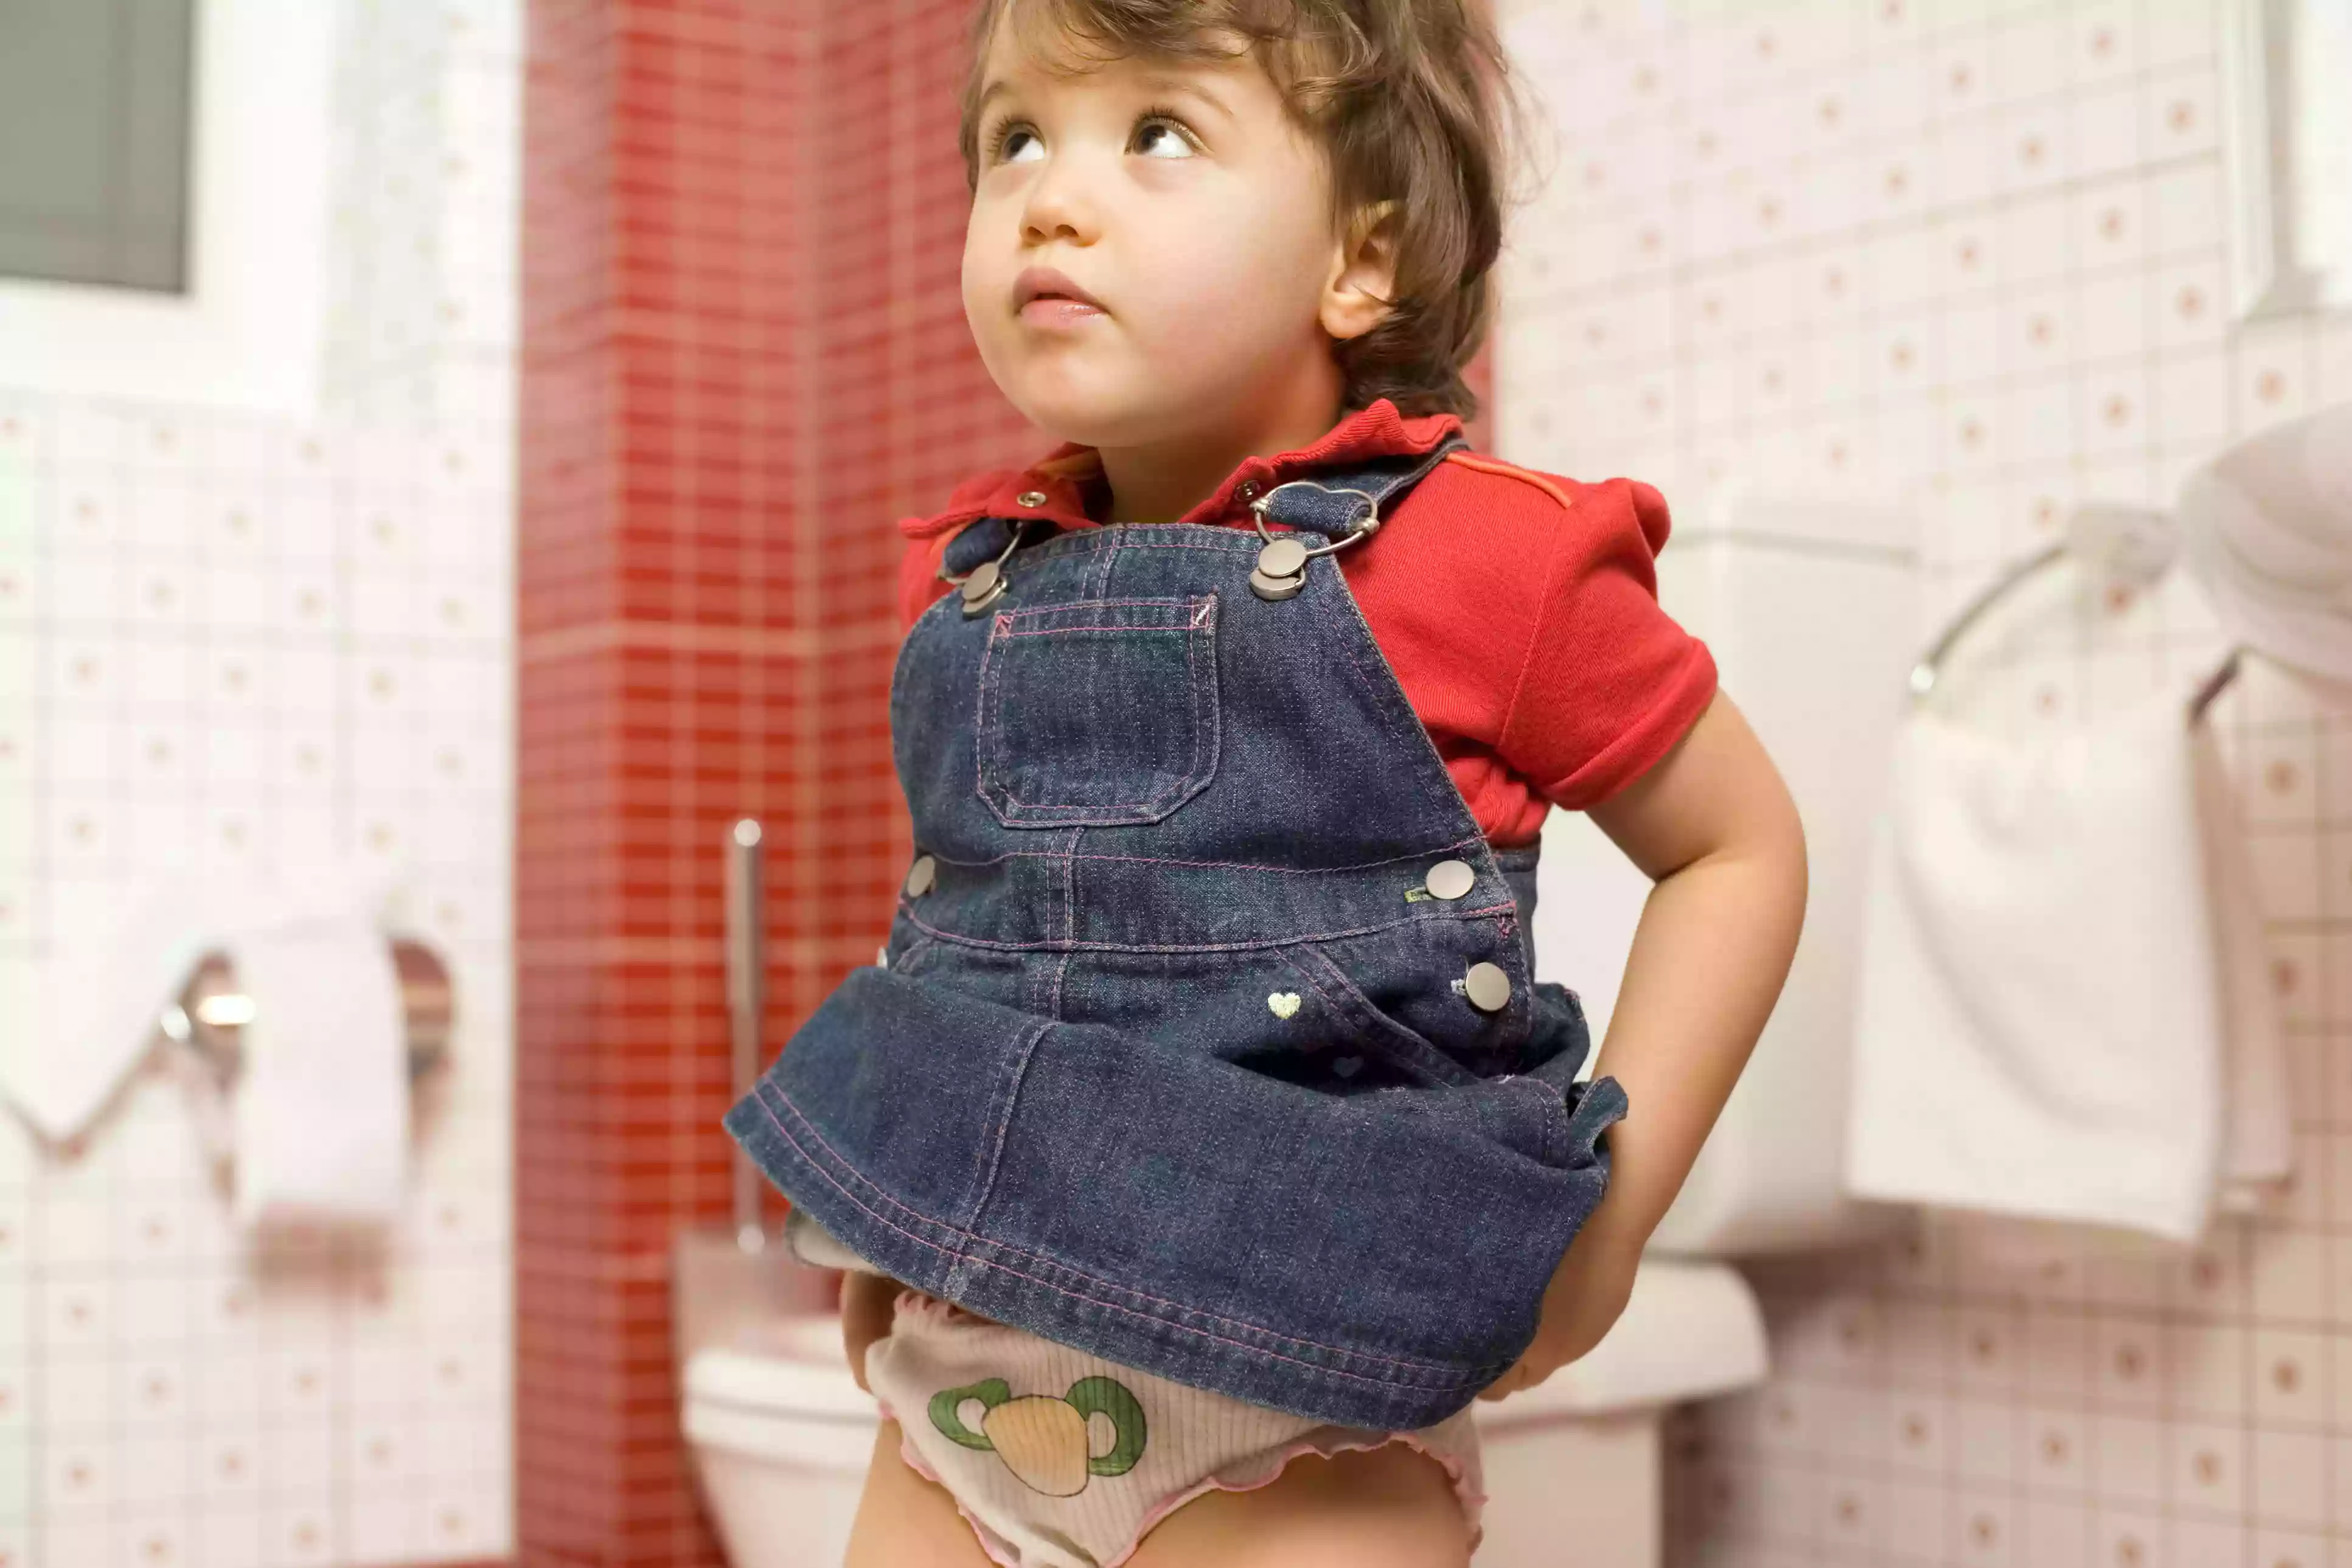 Toddler in the bathroom